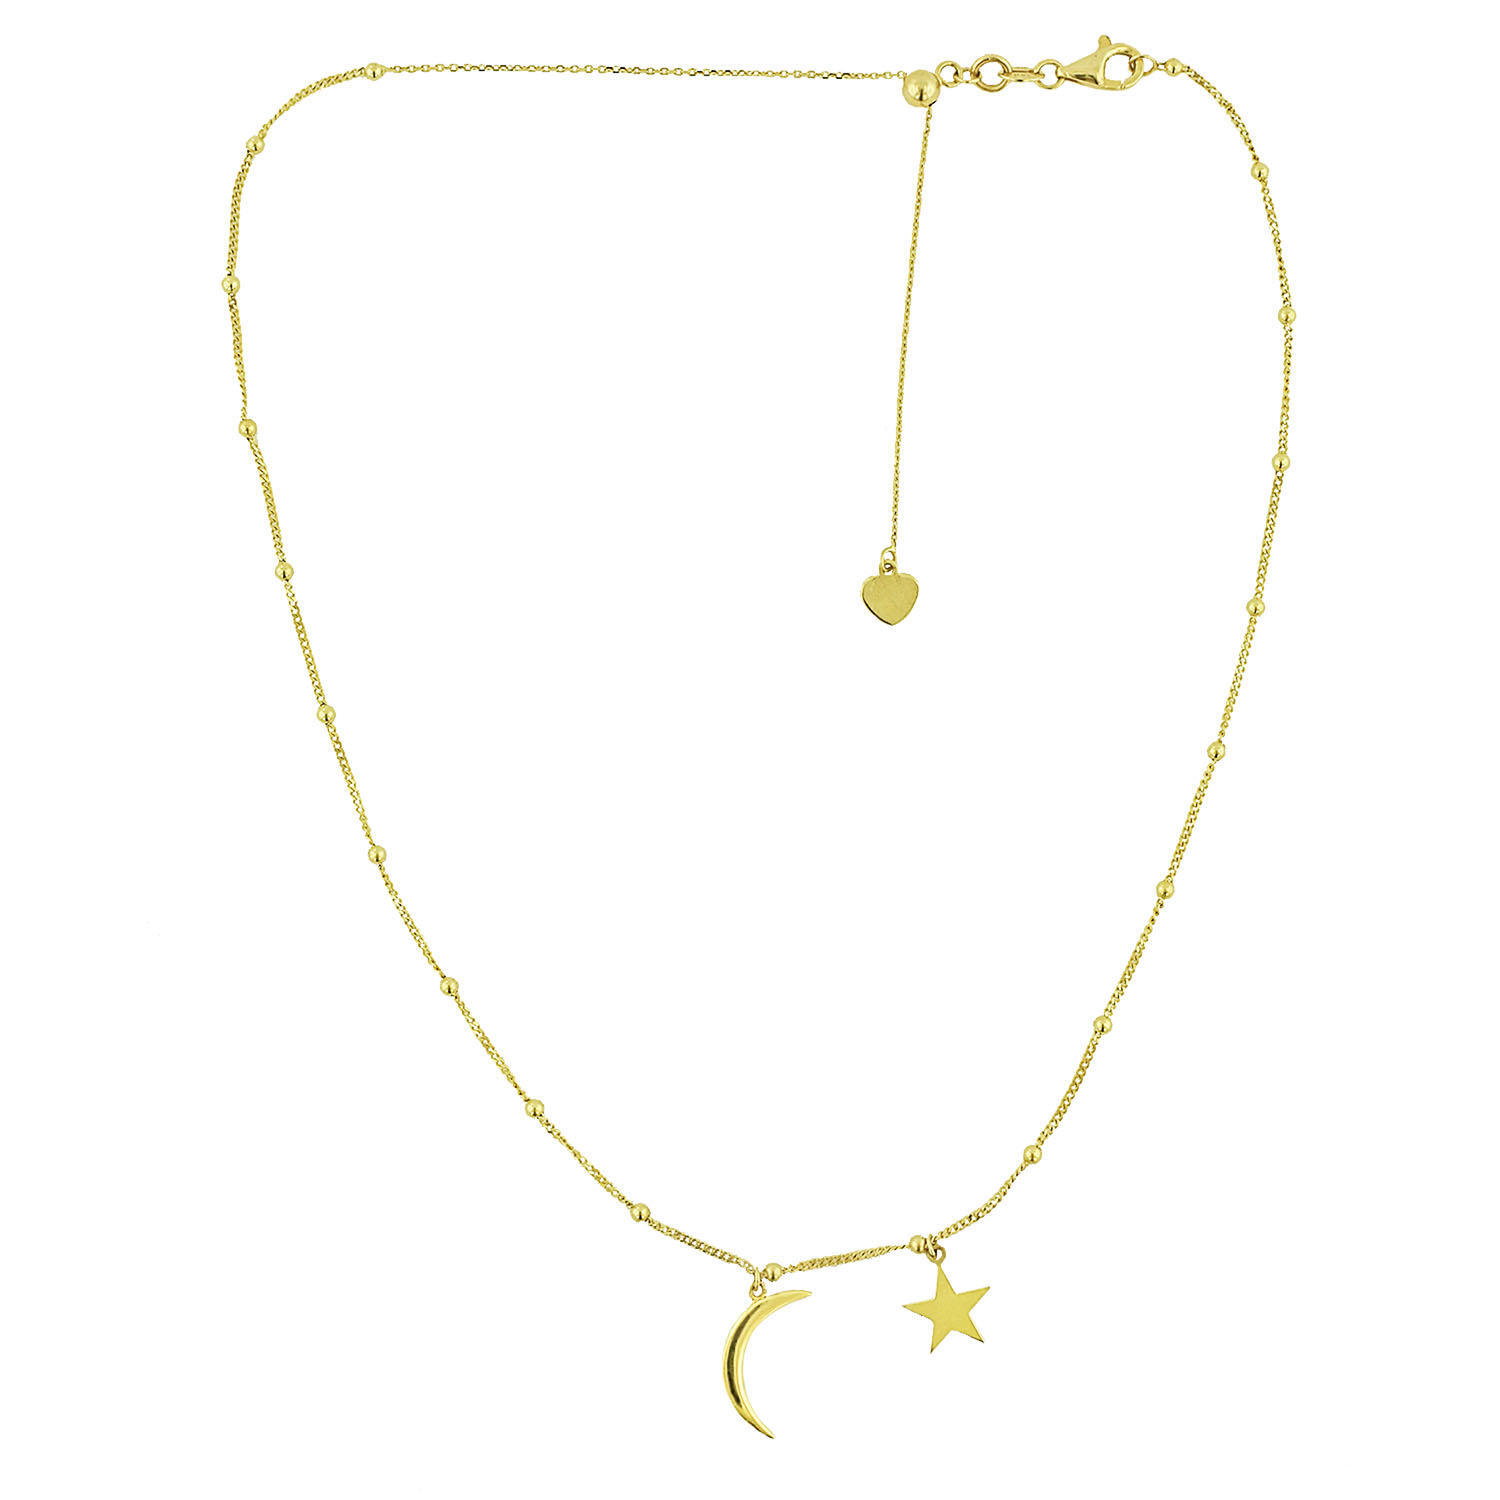 Lexzington - Home Of Prestigious Finds - 14K Gold Moon and Star Choker With Beads